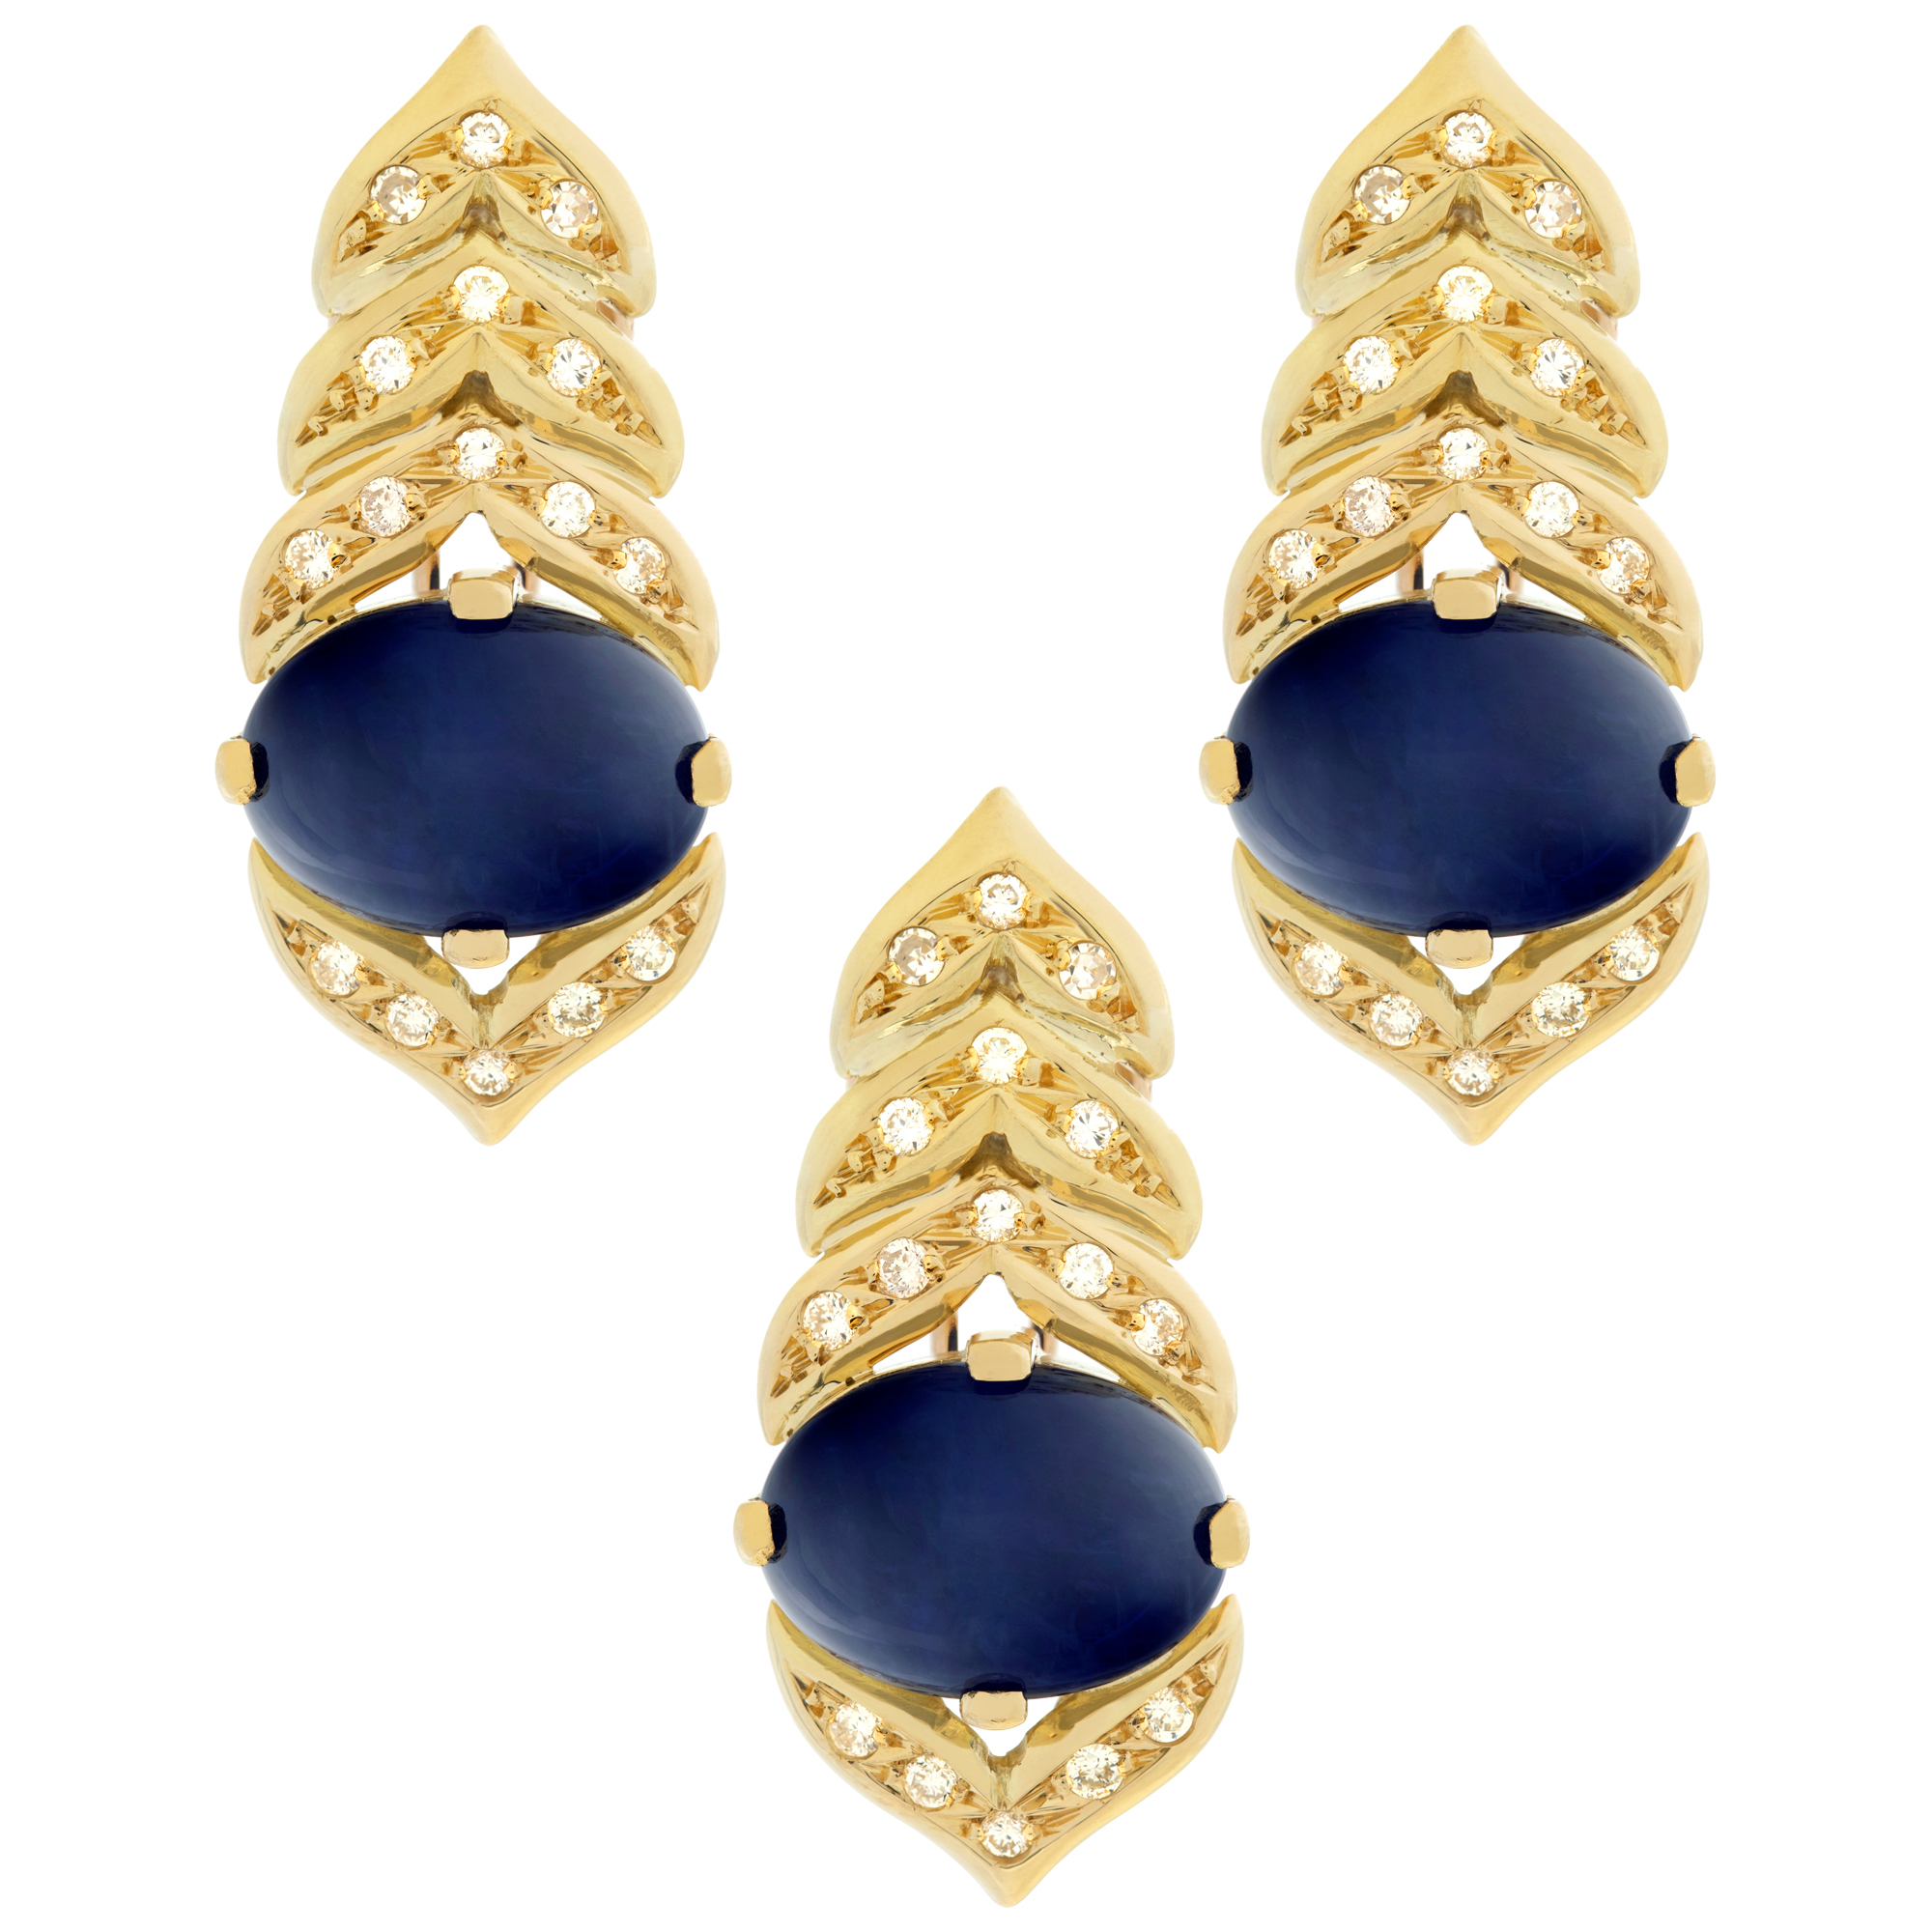 Cabochon Sapphire and round  brilliant cut diamonds 3 pieces pendant and earrings set, in 18k yellow gold